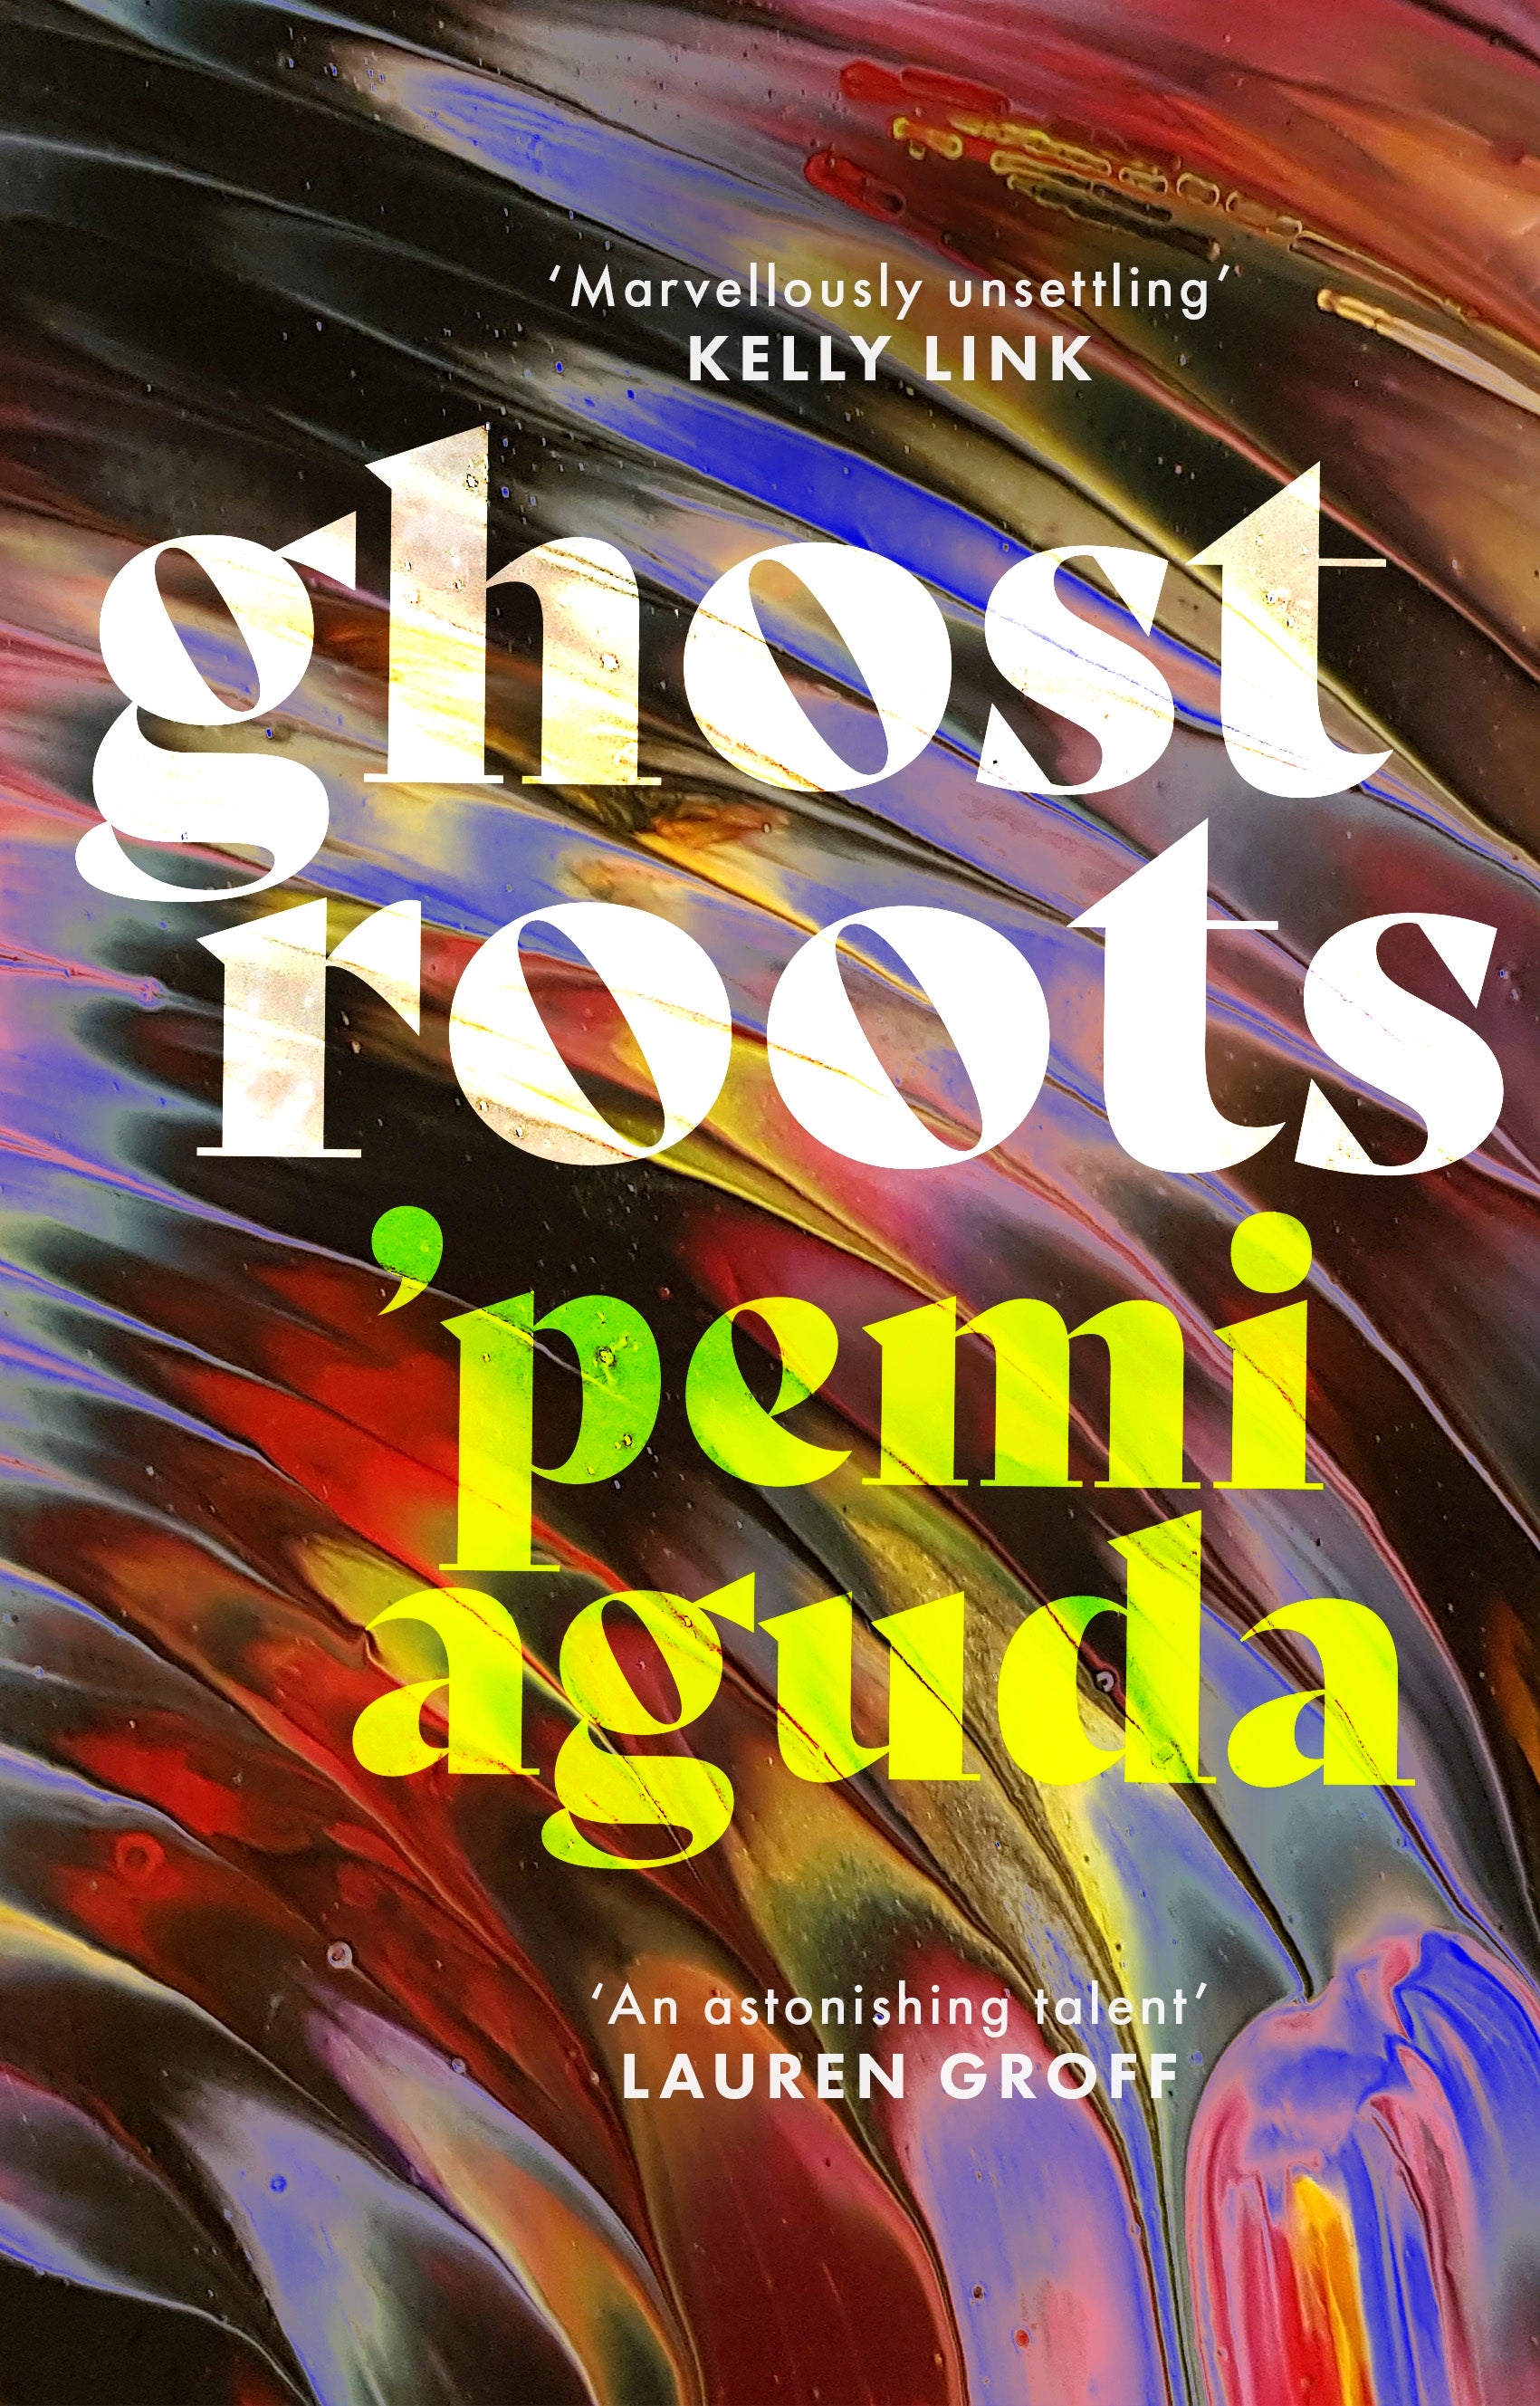 Ghostroots by 'Pemi Aguda